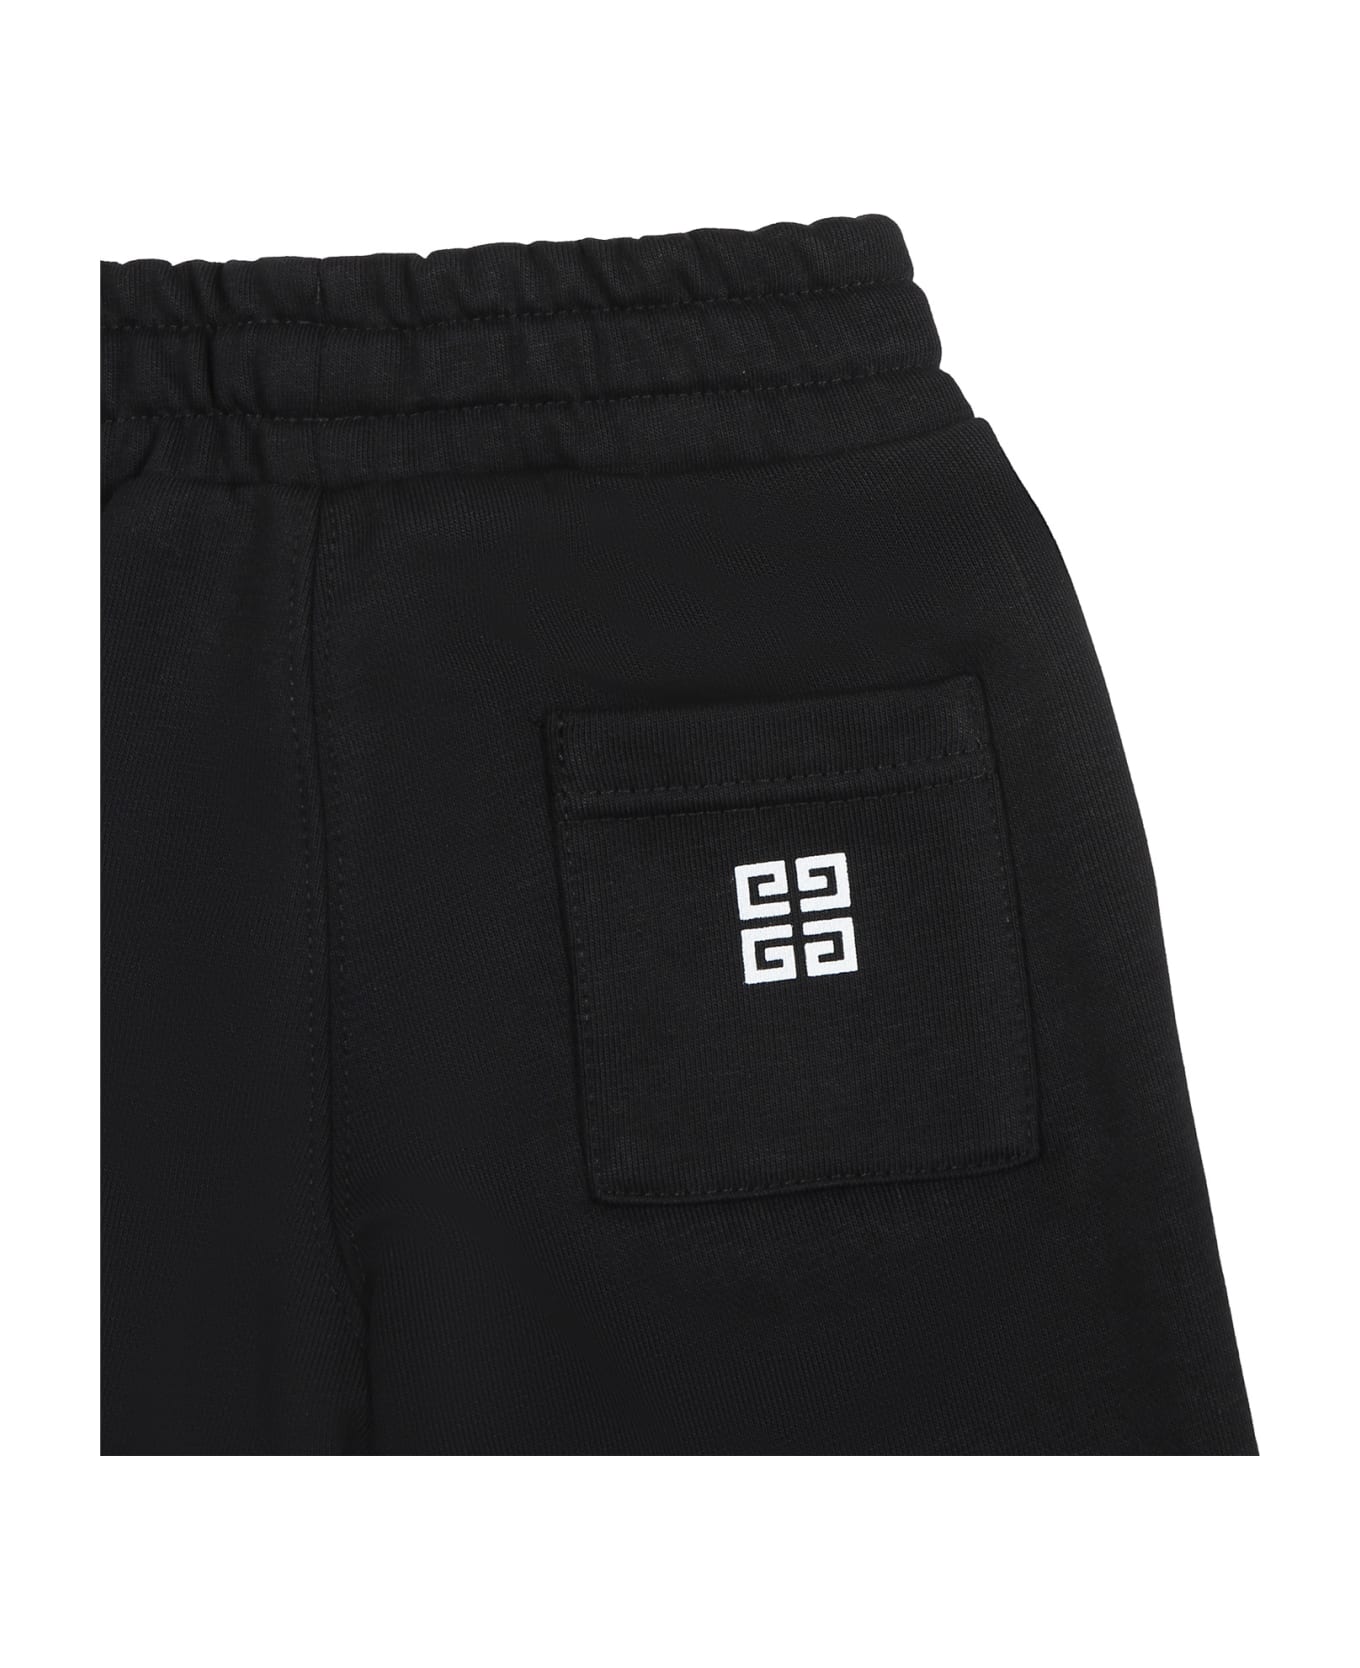 Givenchy Black Tracksuit Trousers Fpr Baby Boy With Logo - Black